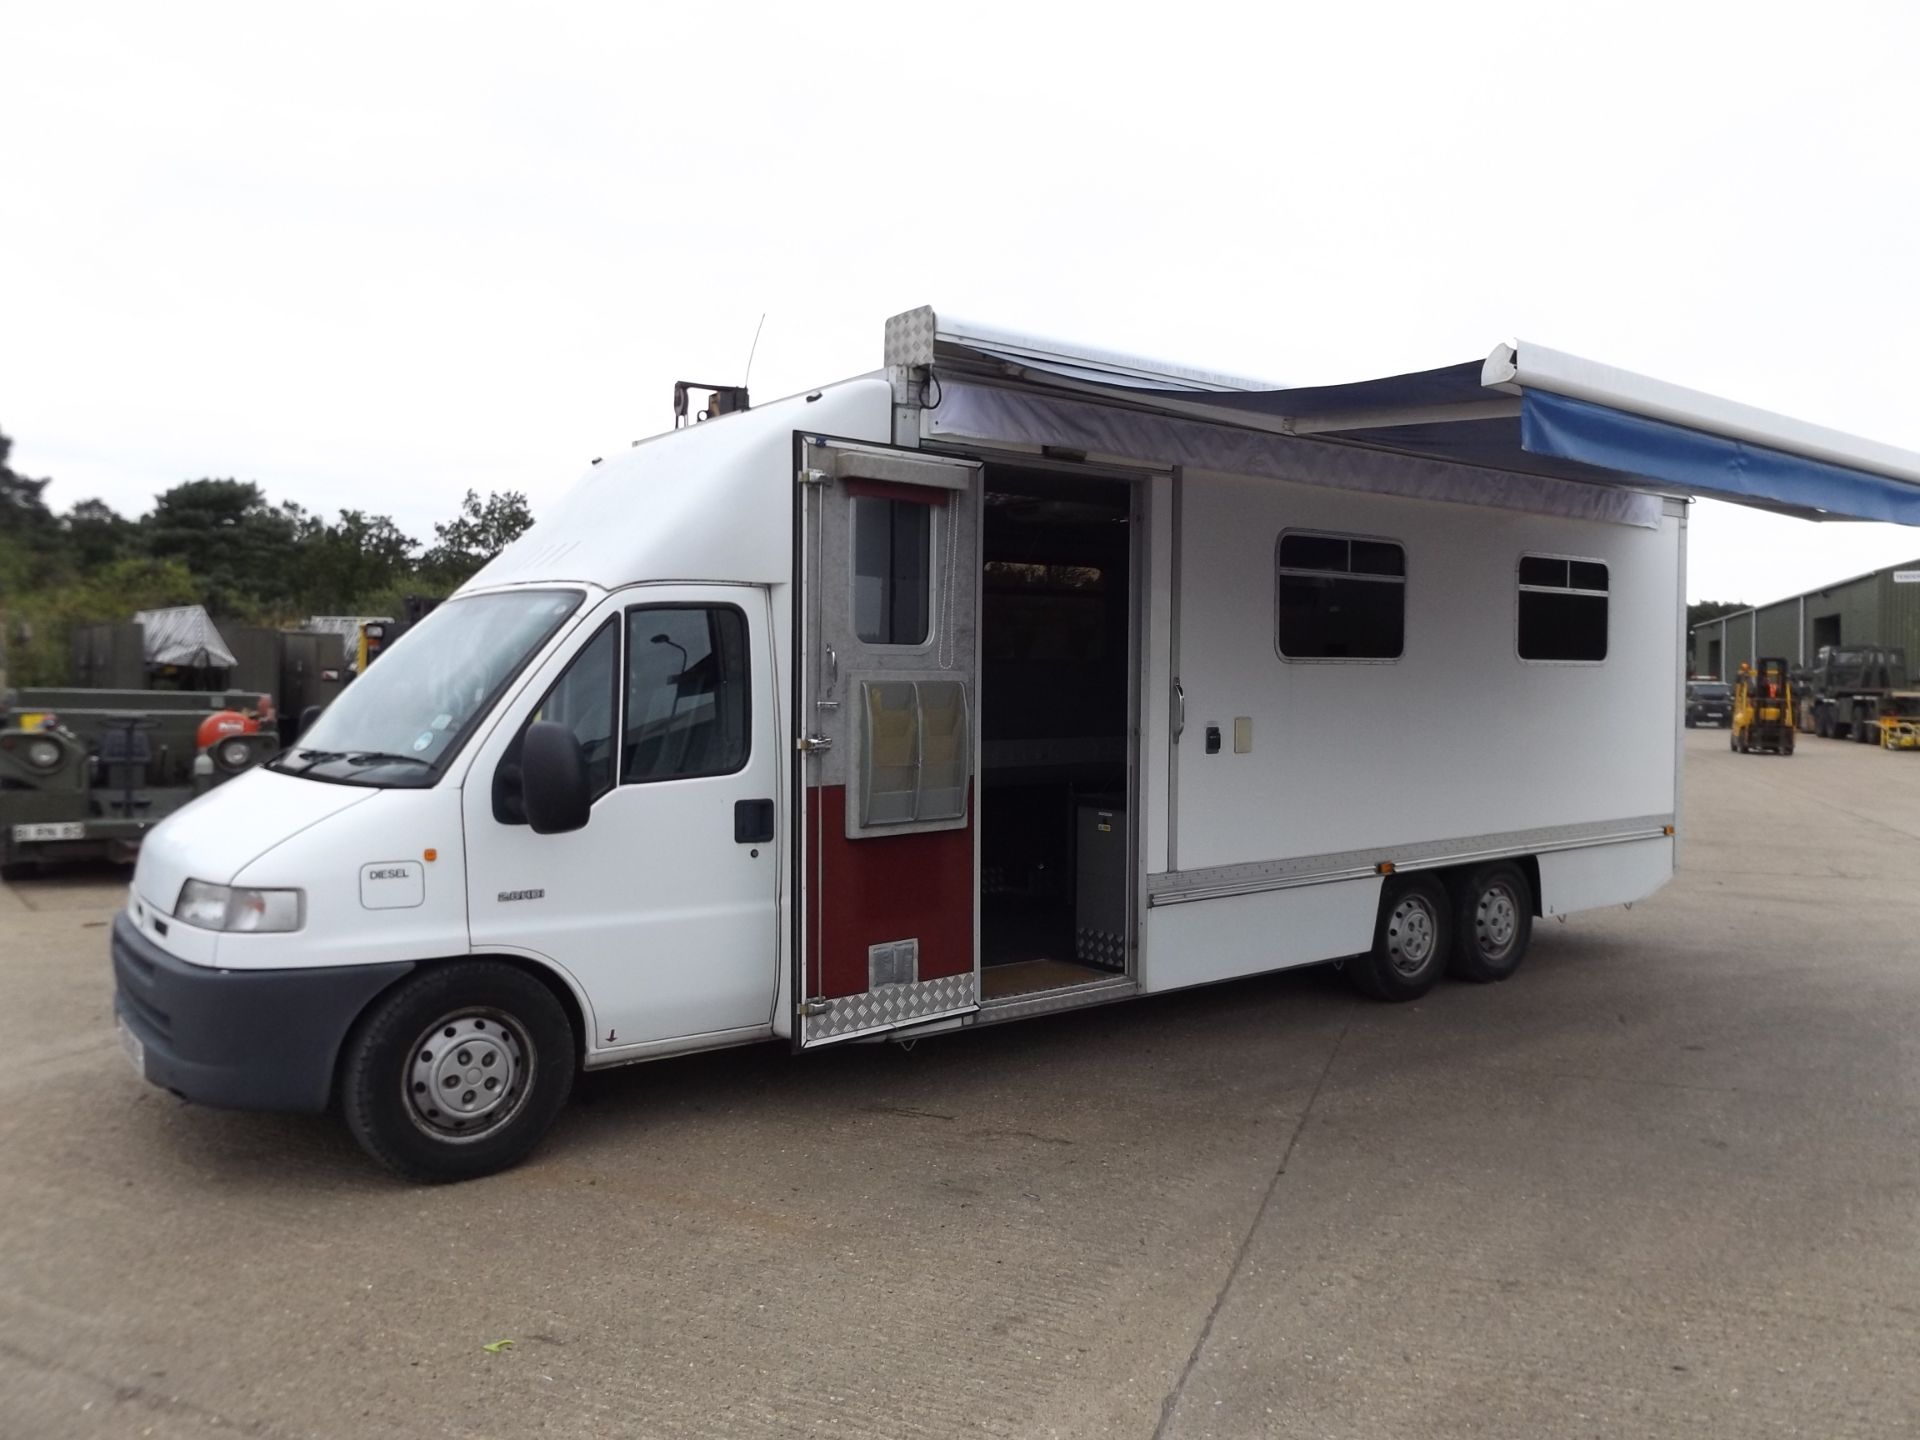 Citroen Relay 2.8HDi MWB Tri Axle Van only 24,529 miles! IDEAL CAMPER/EXPEDITION VEHICLE